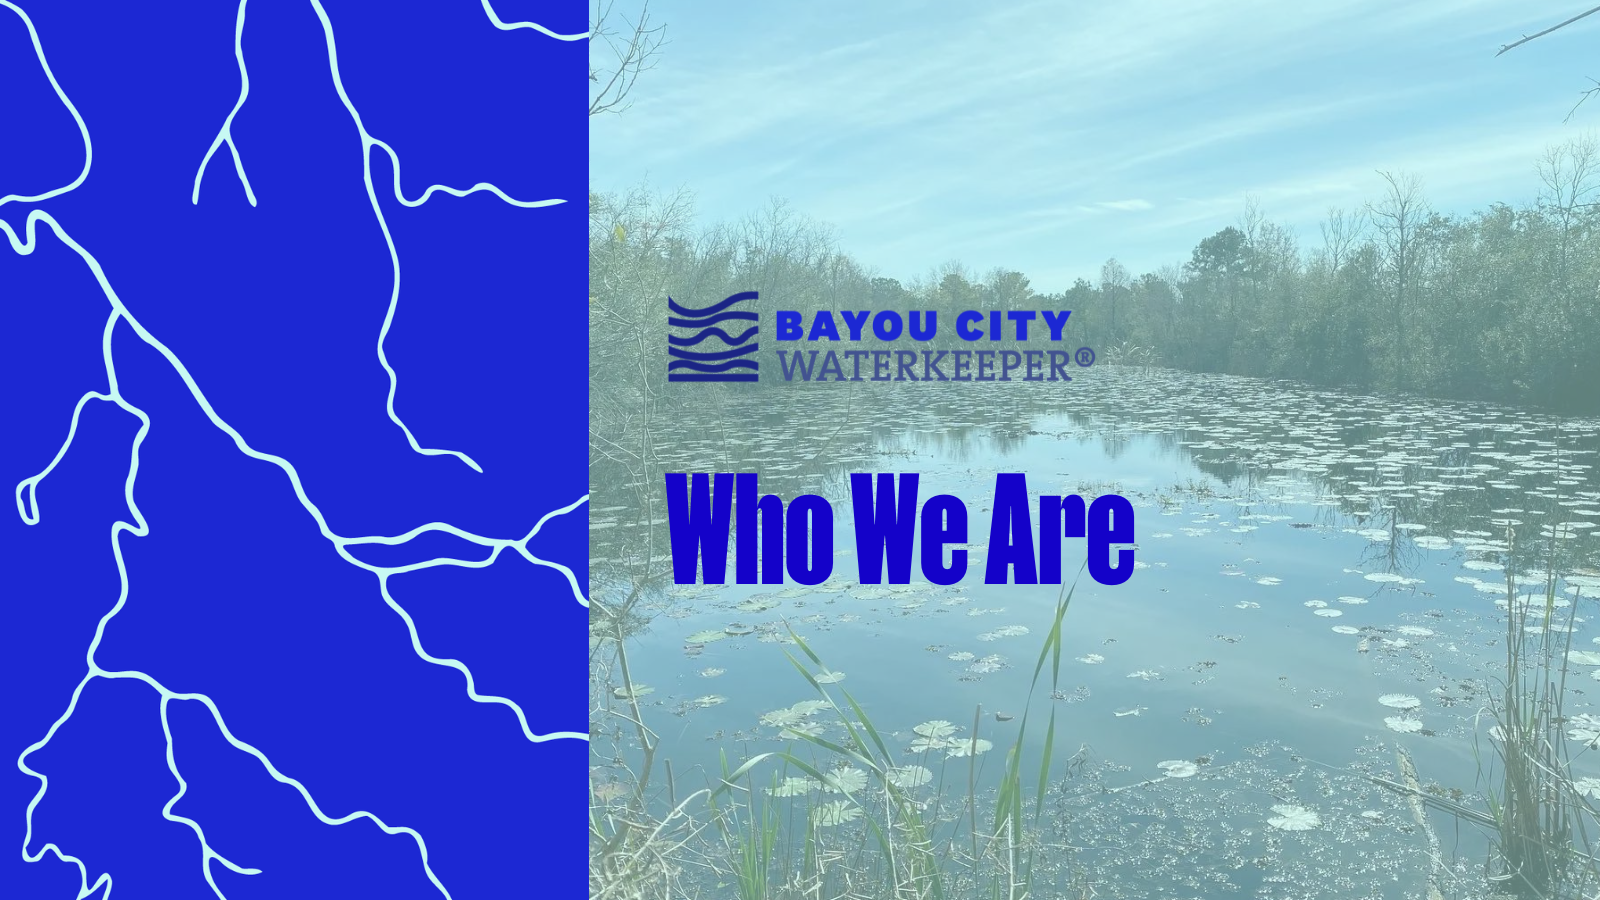 Our story Bayou City Waterkeeper